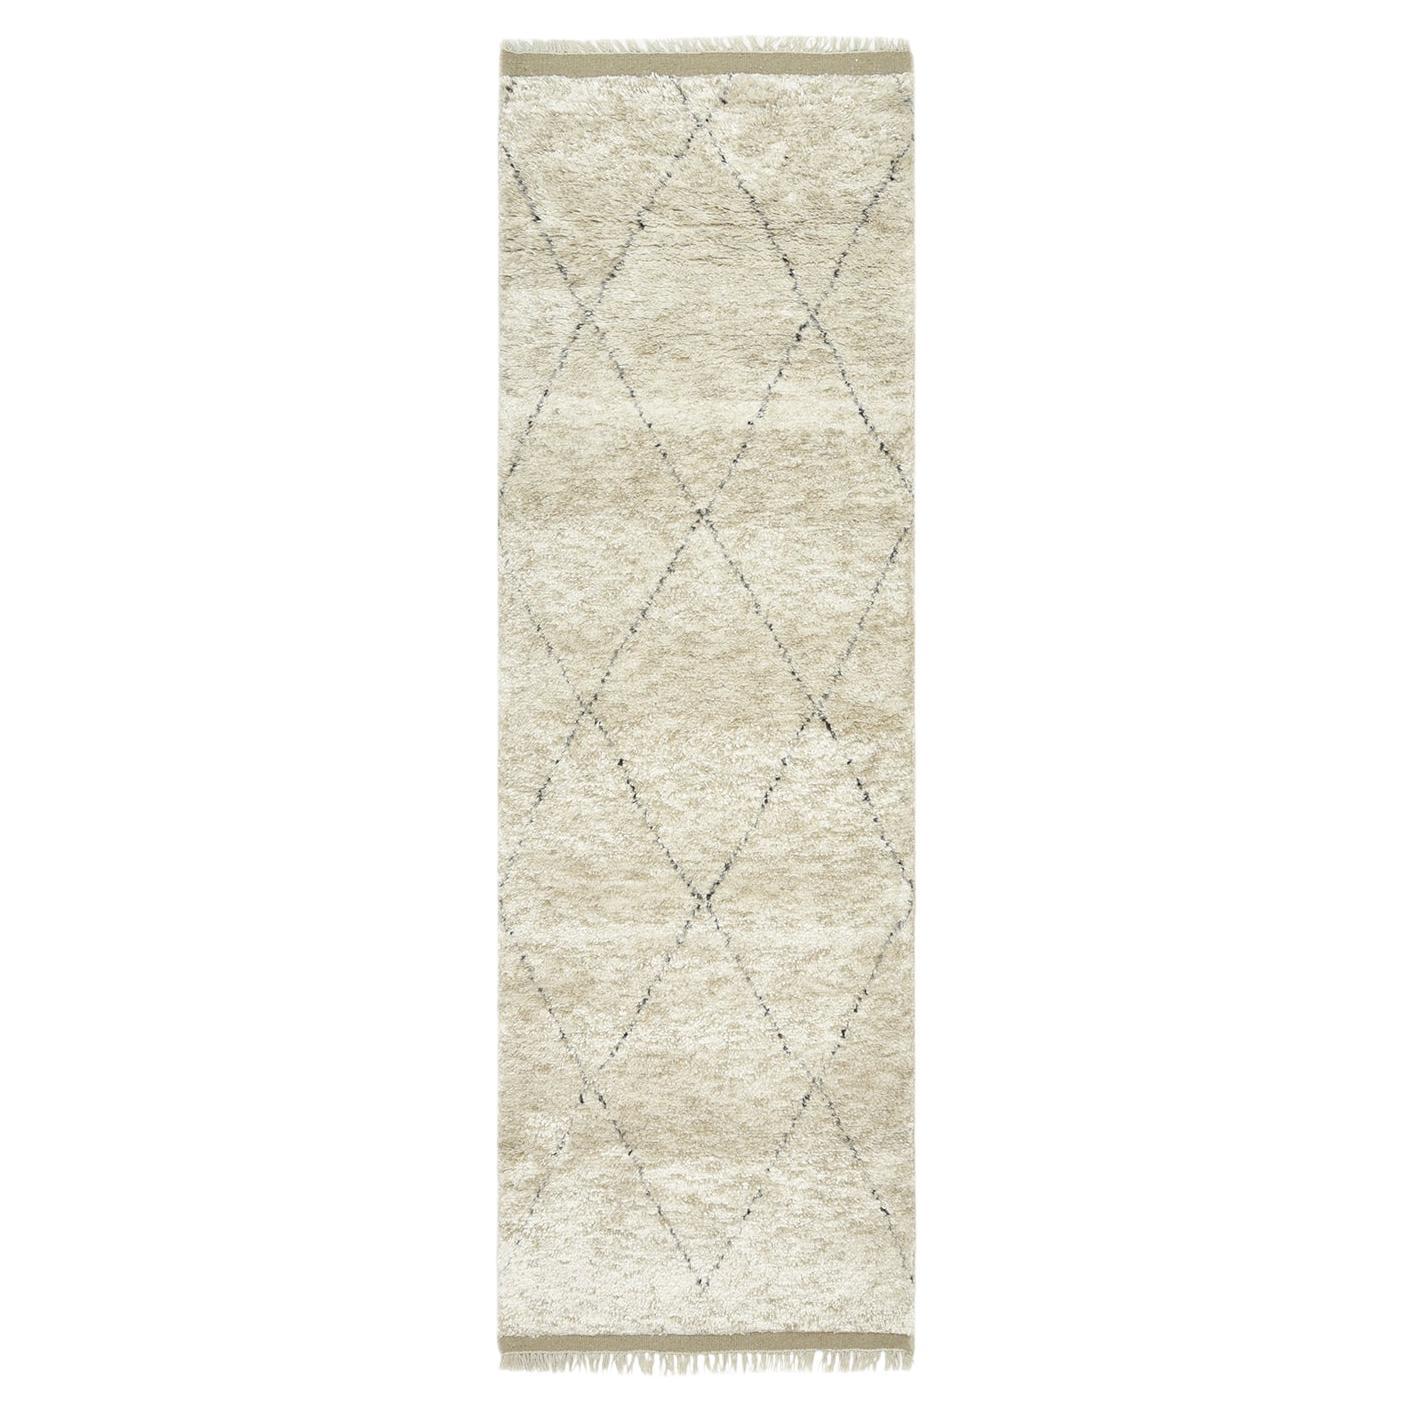 Solo Rugs Shaggy Moroccan Bohemian Moroccan Handmade Runner Ivory For Sale